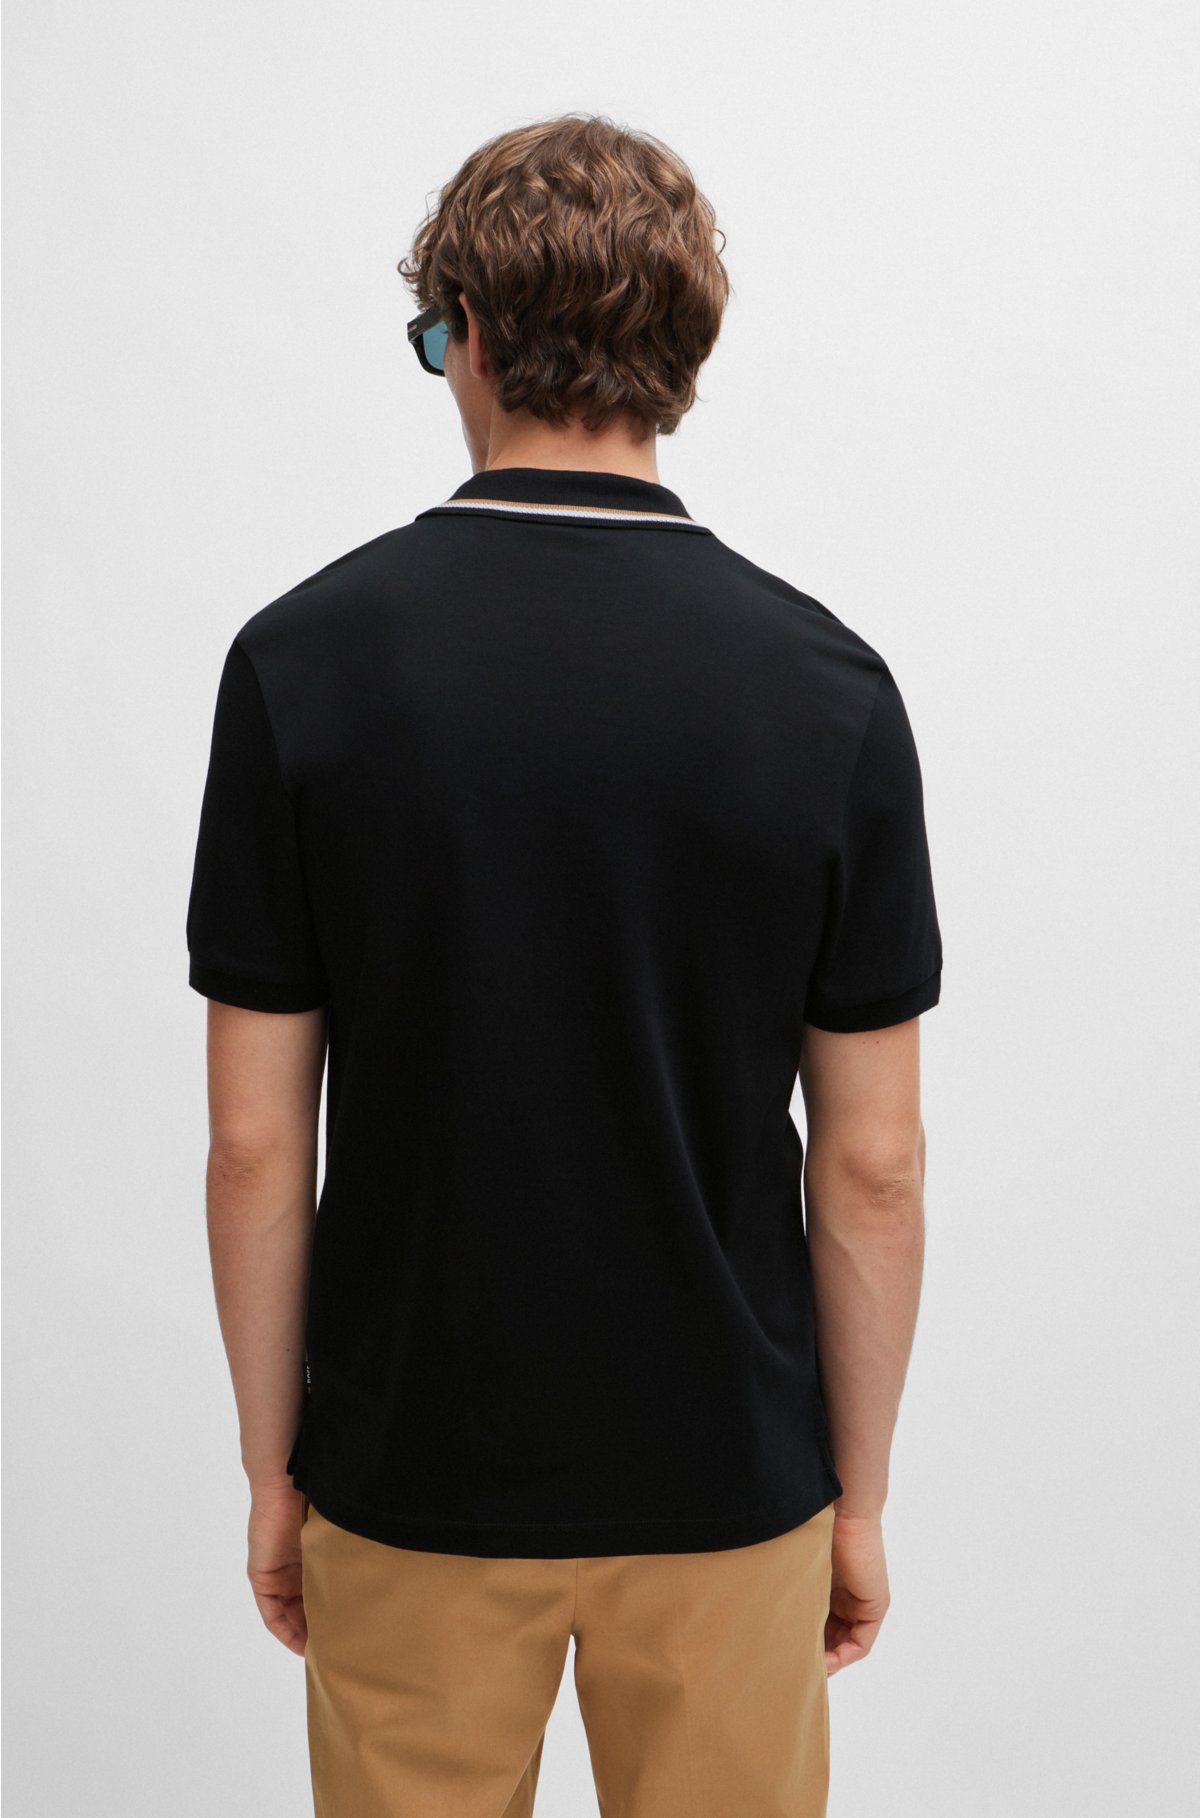 Slim-fit polo shirt in cotton with striped collar, Black